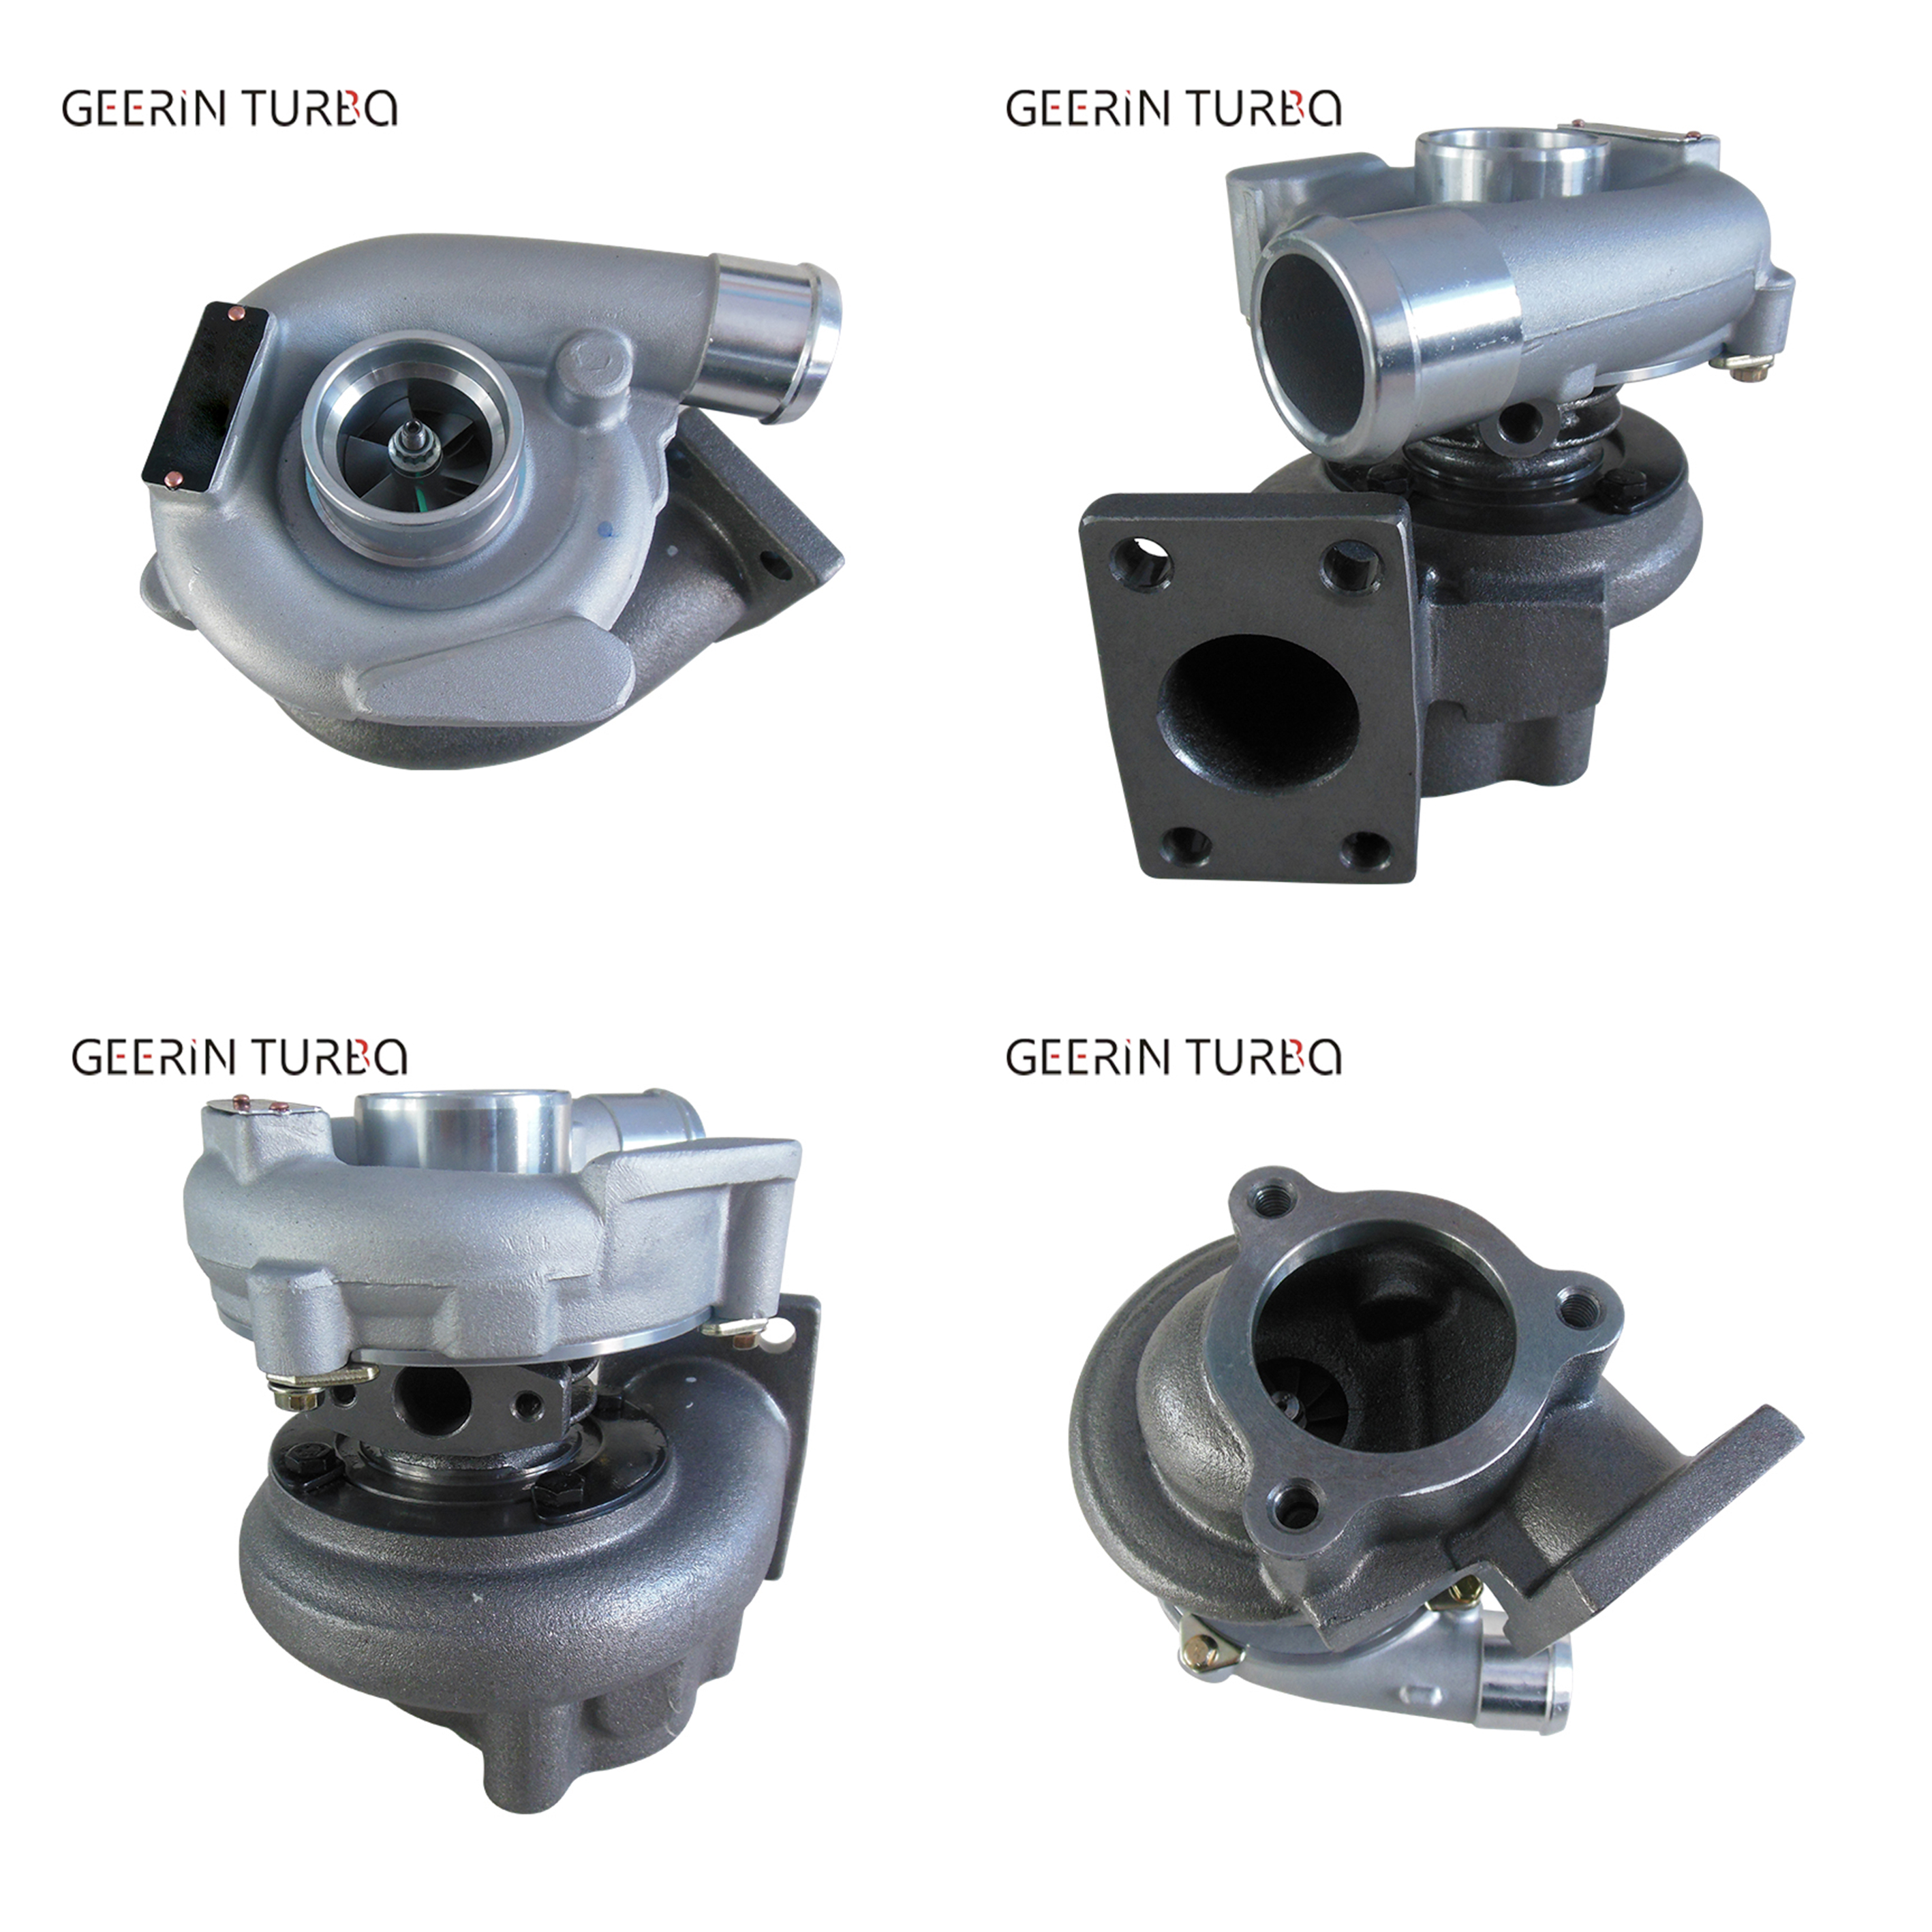 GT2052S 754111-5009 754111-0008 Completely Turbo Turbocharger Kit For Perkins Industrial Gen Set Factory